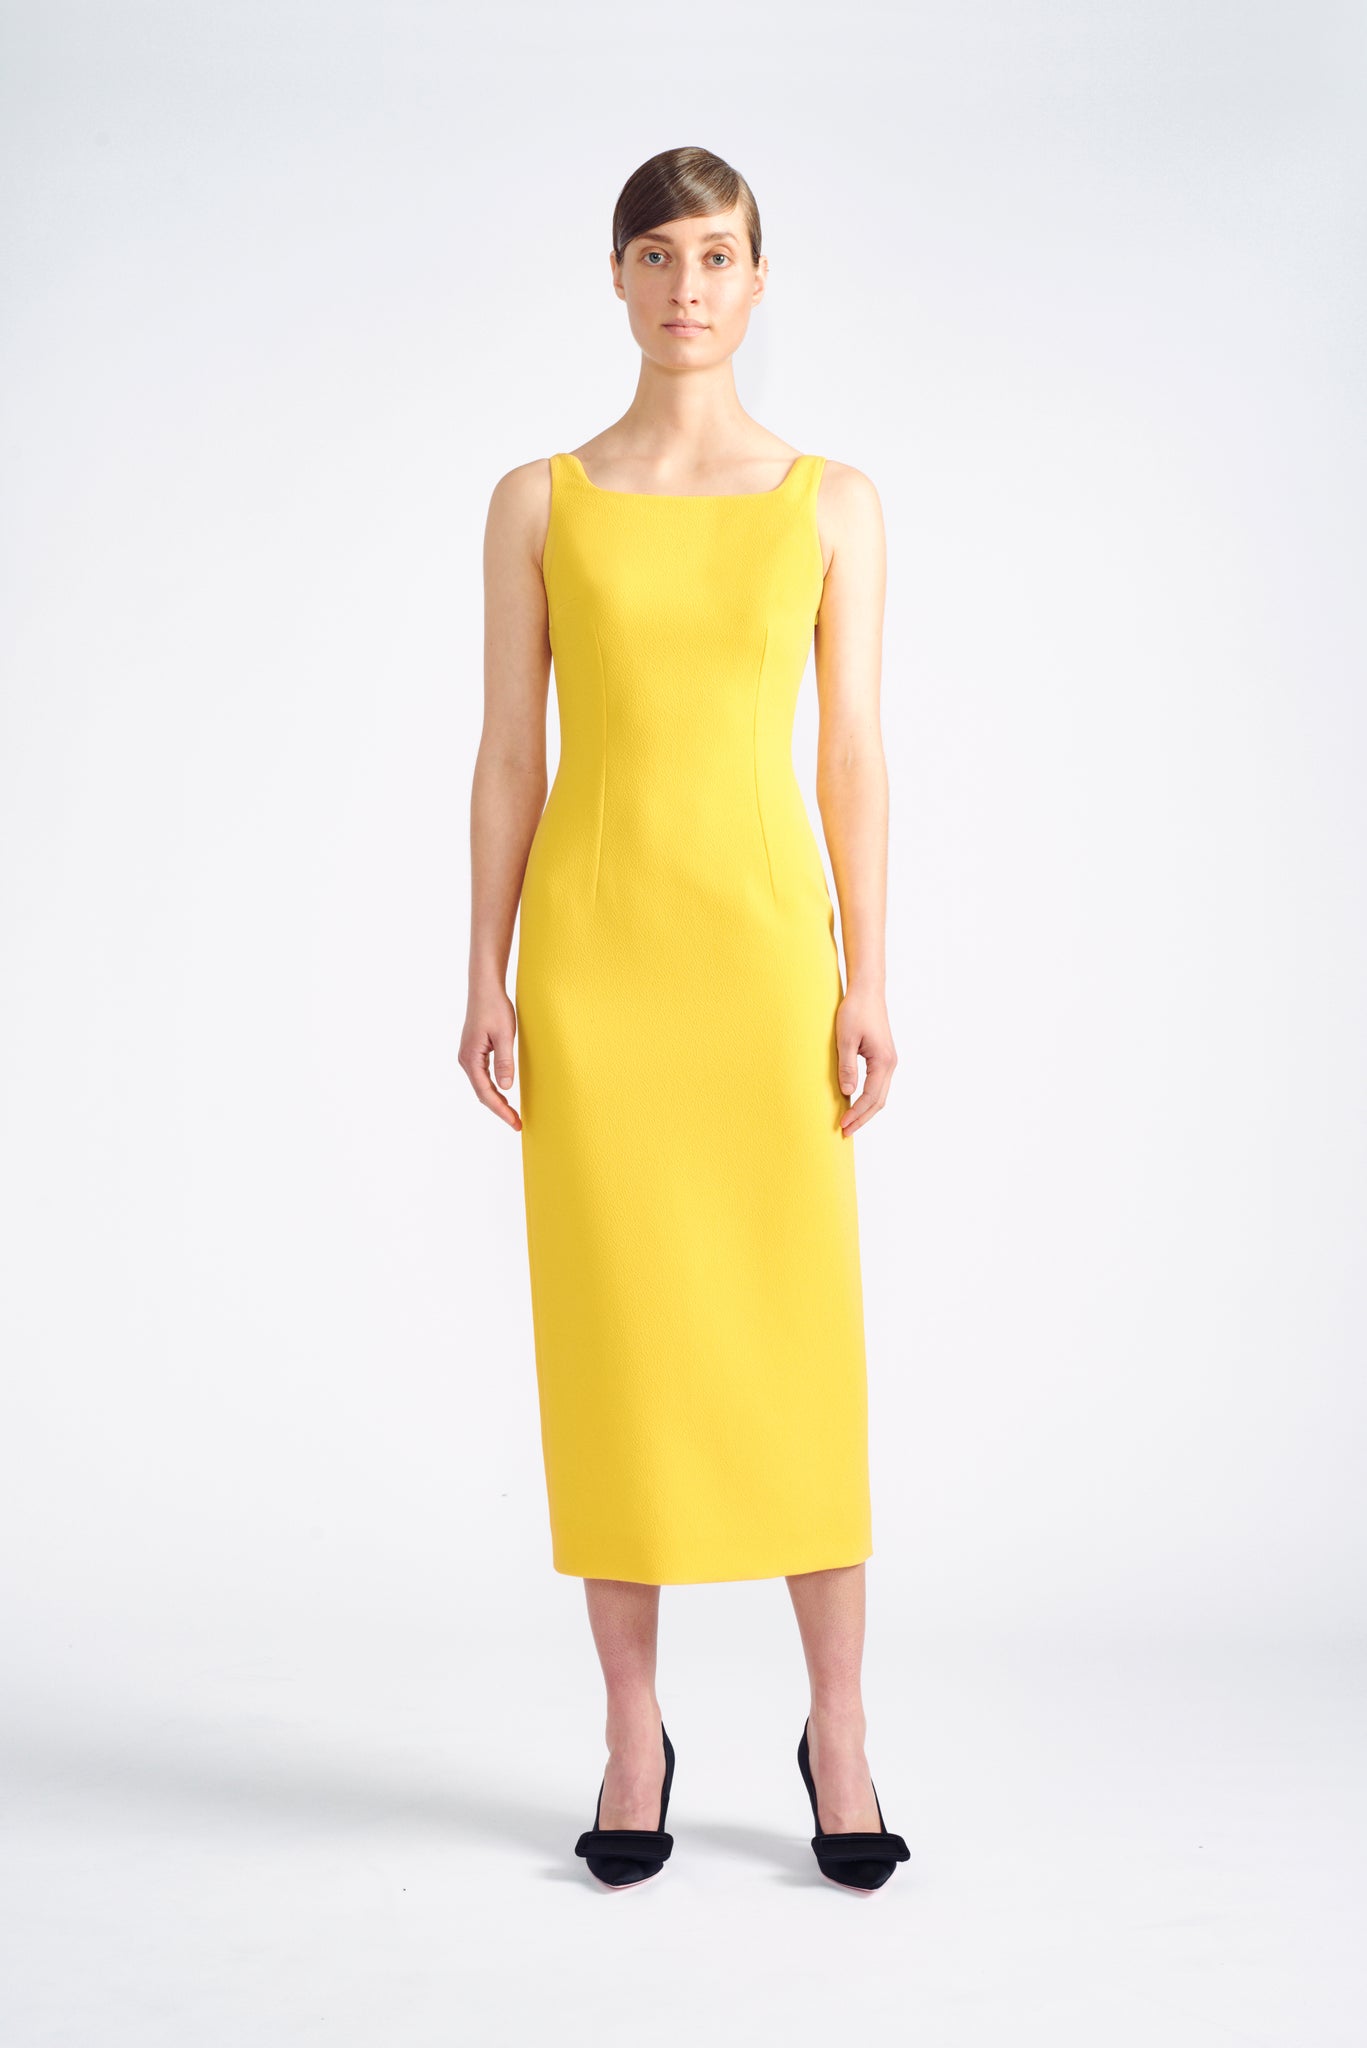 Cleo Dress | Yellow Tailored Pencil Dress with Cutout Back | Emilia Wickstead